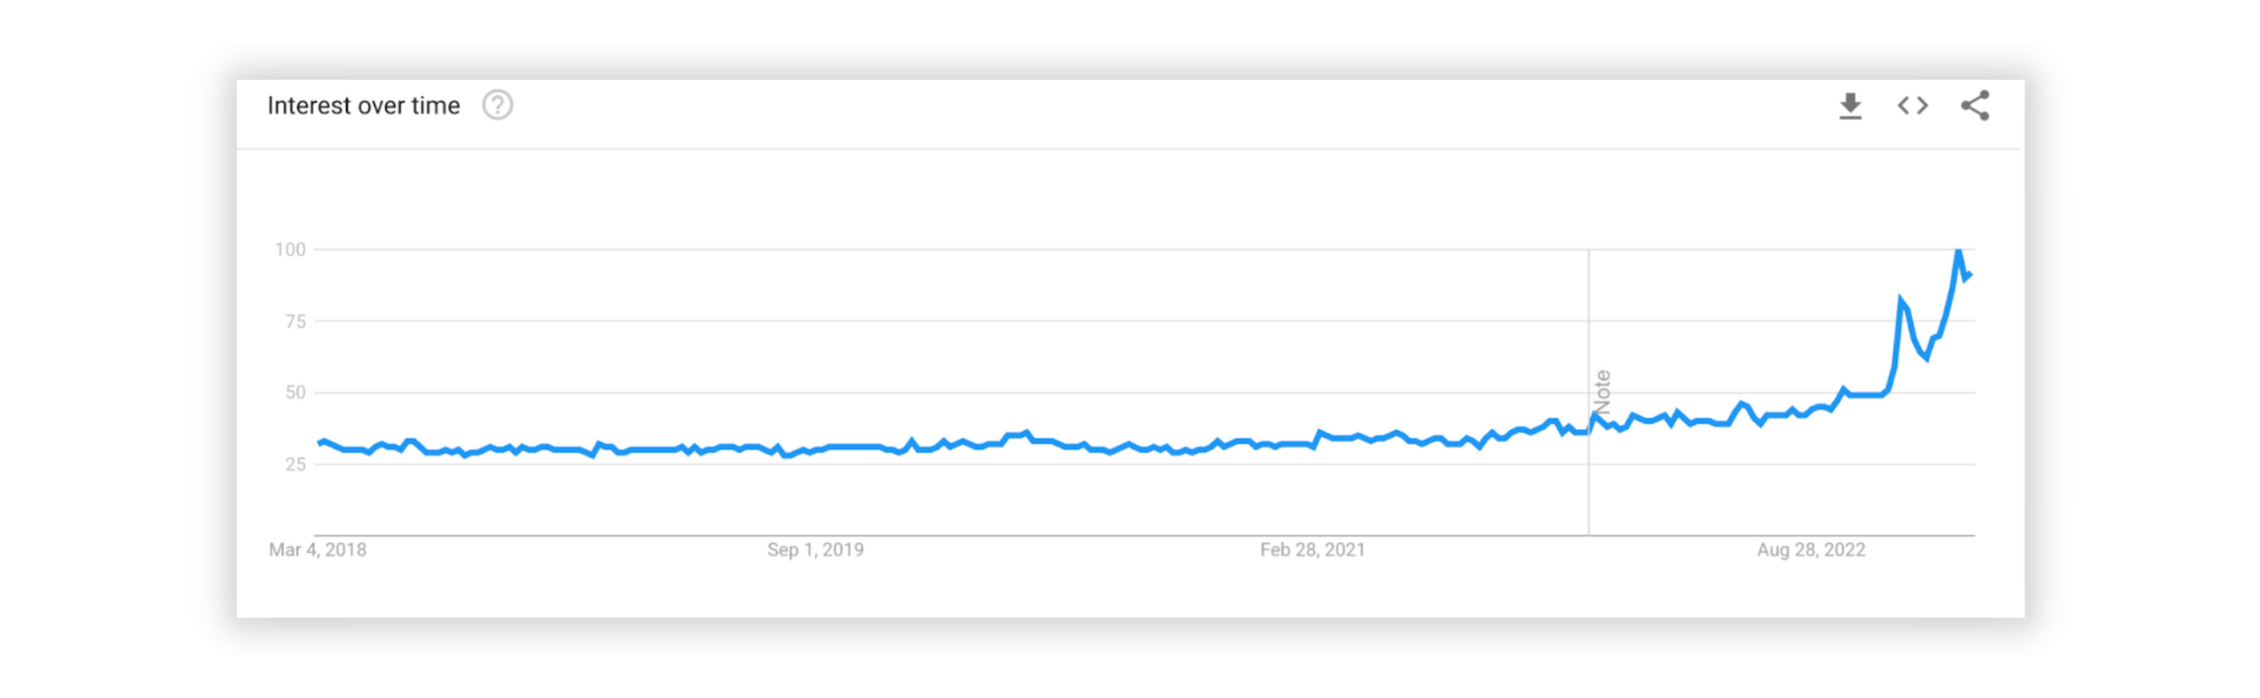 Google Trends chart for the product development trend artificial intelligence